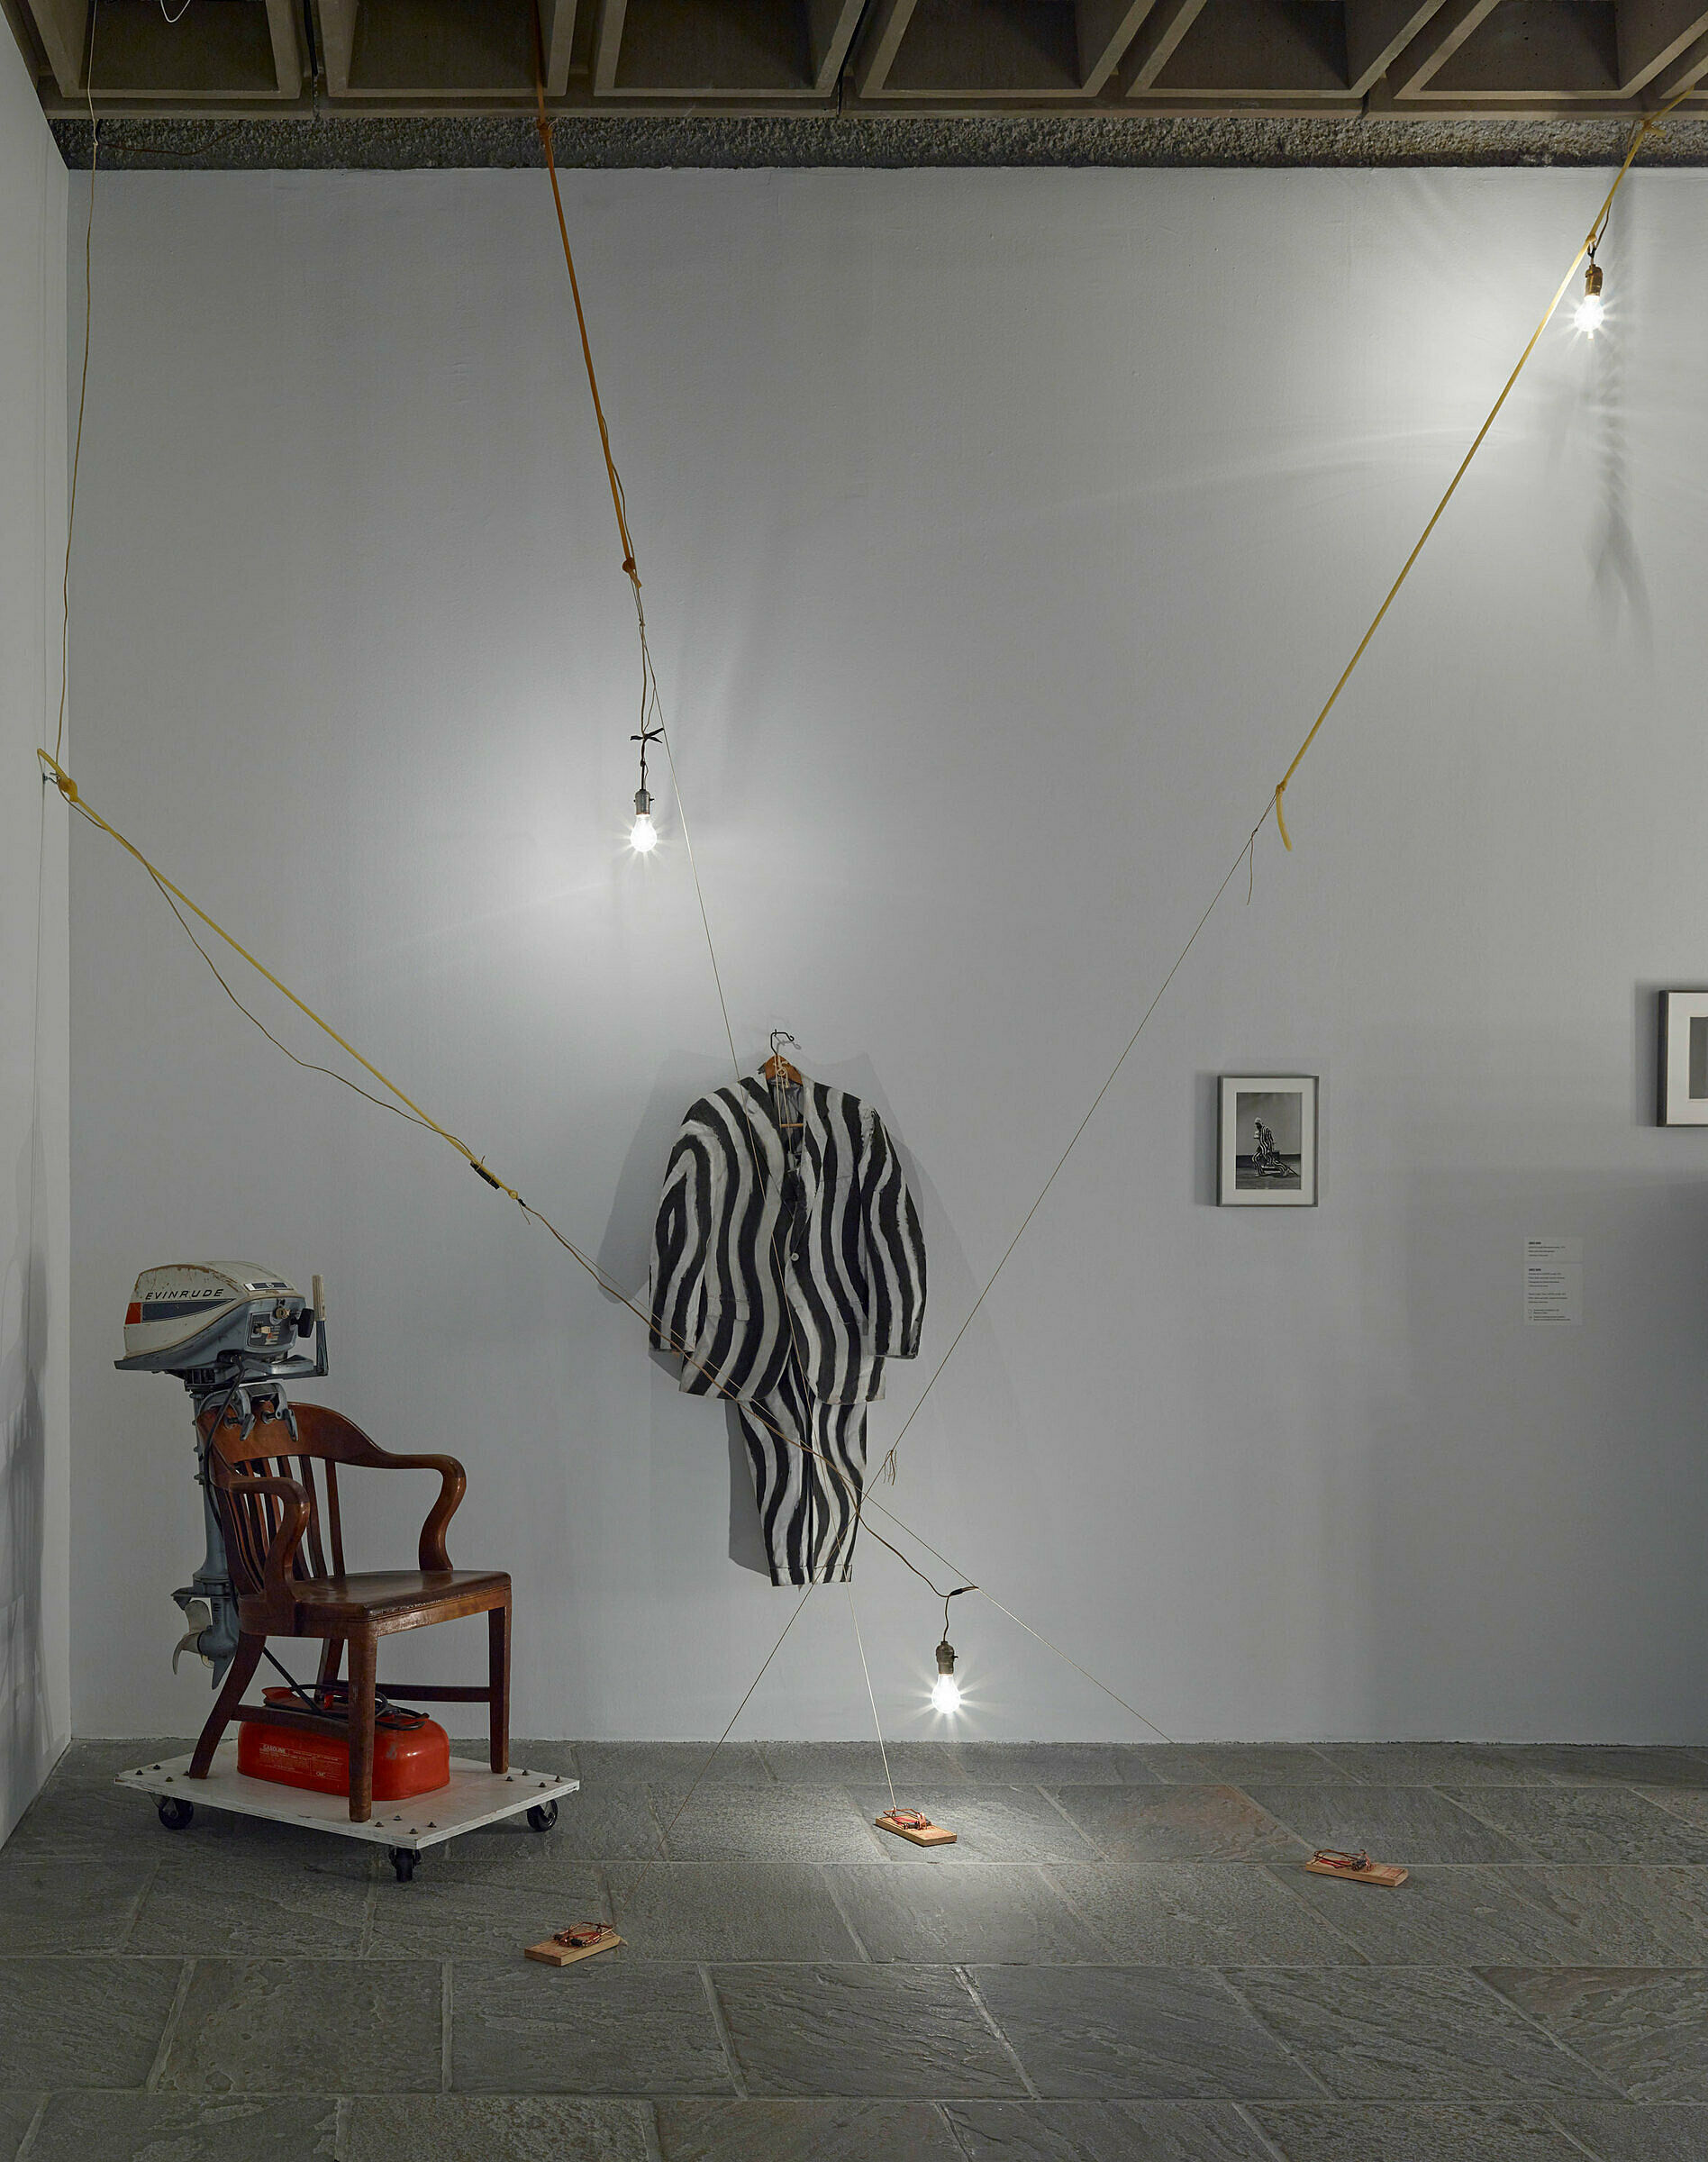 Art installation in a gallery with a chair in the corner and striped outfit on the wall.